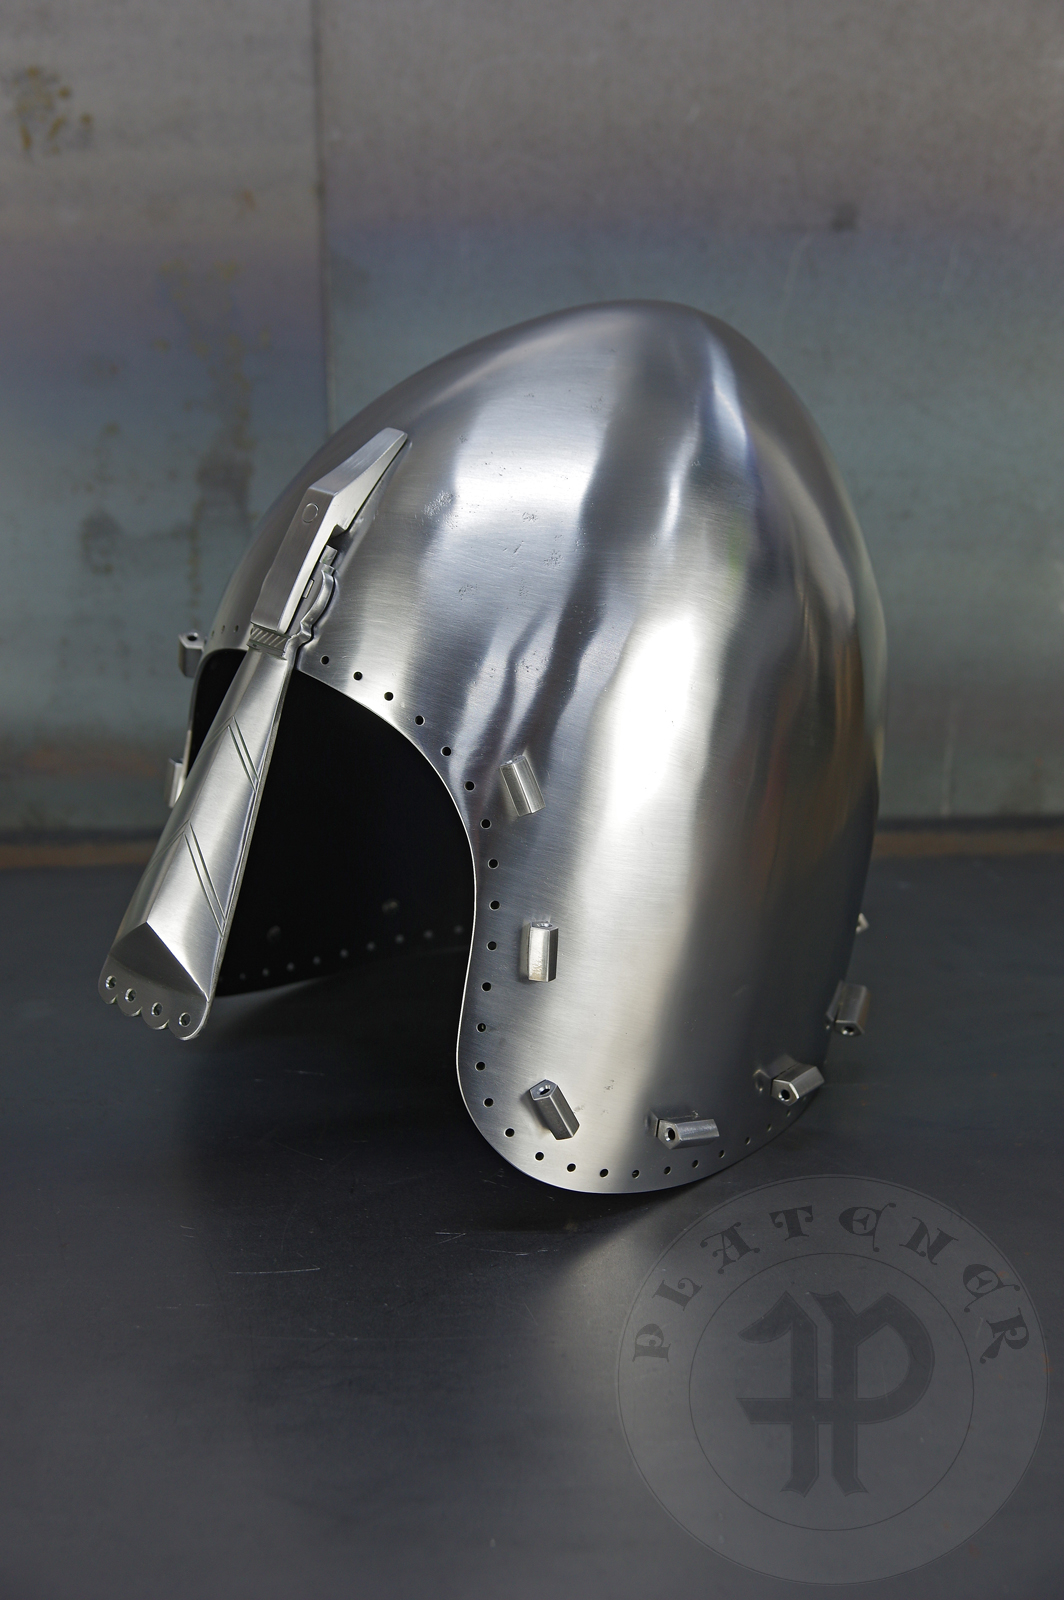 Reproduction of the helmet from Nysa(Poland) equipped with a nasal guard based on the original from Amersfoort (Holland). / Replika hemu z Nysy wyposaona w nosal wzorowany na oryginale z Amersfoort w Holandii.